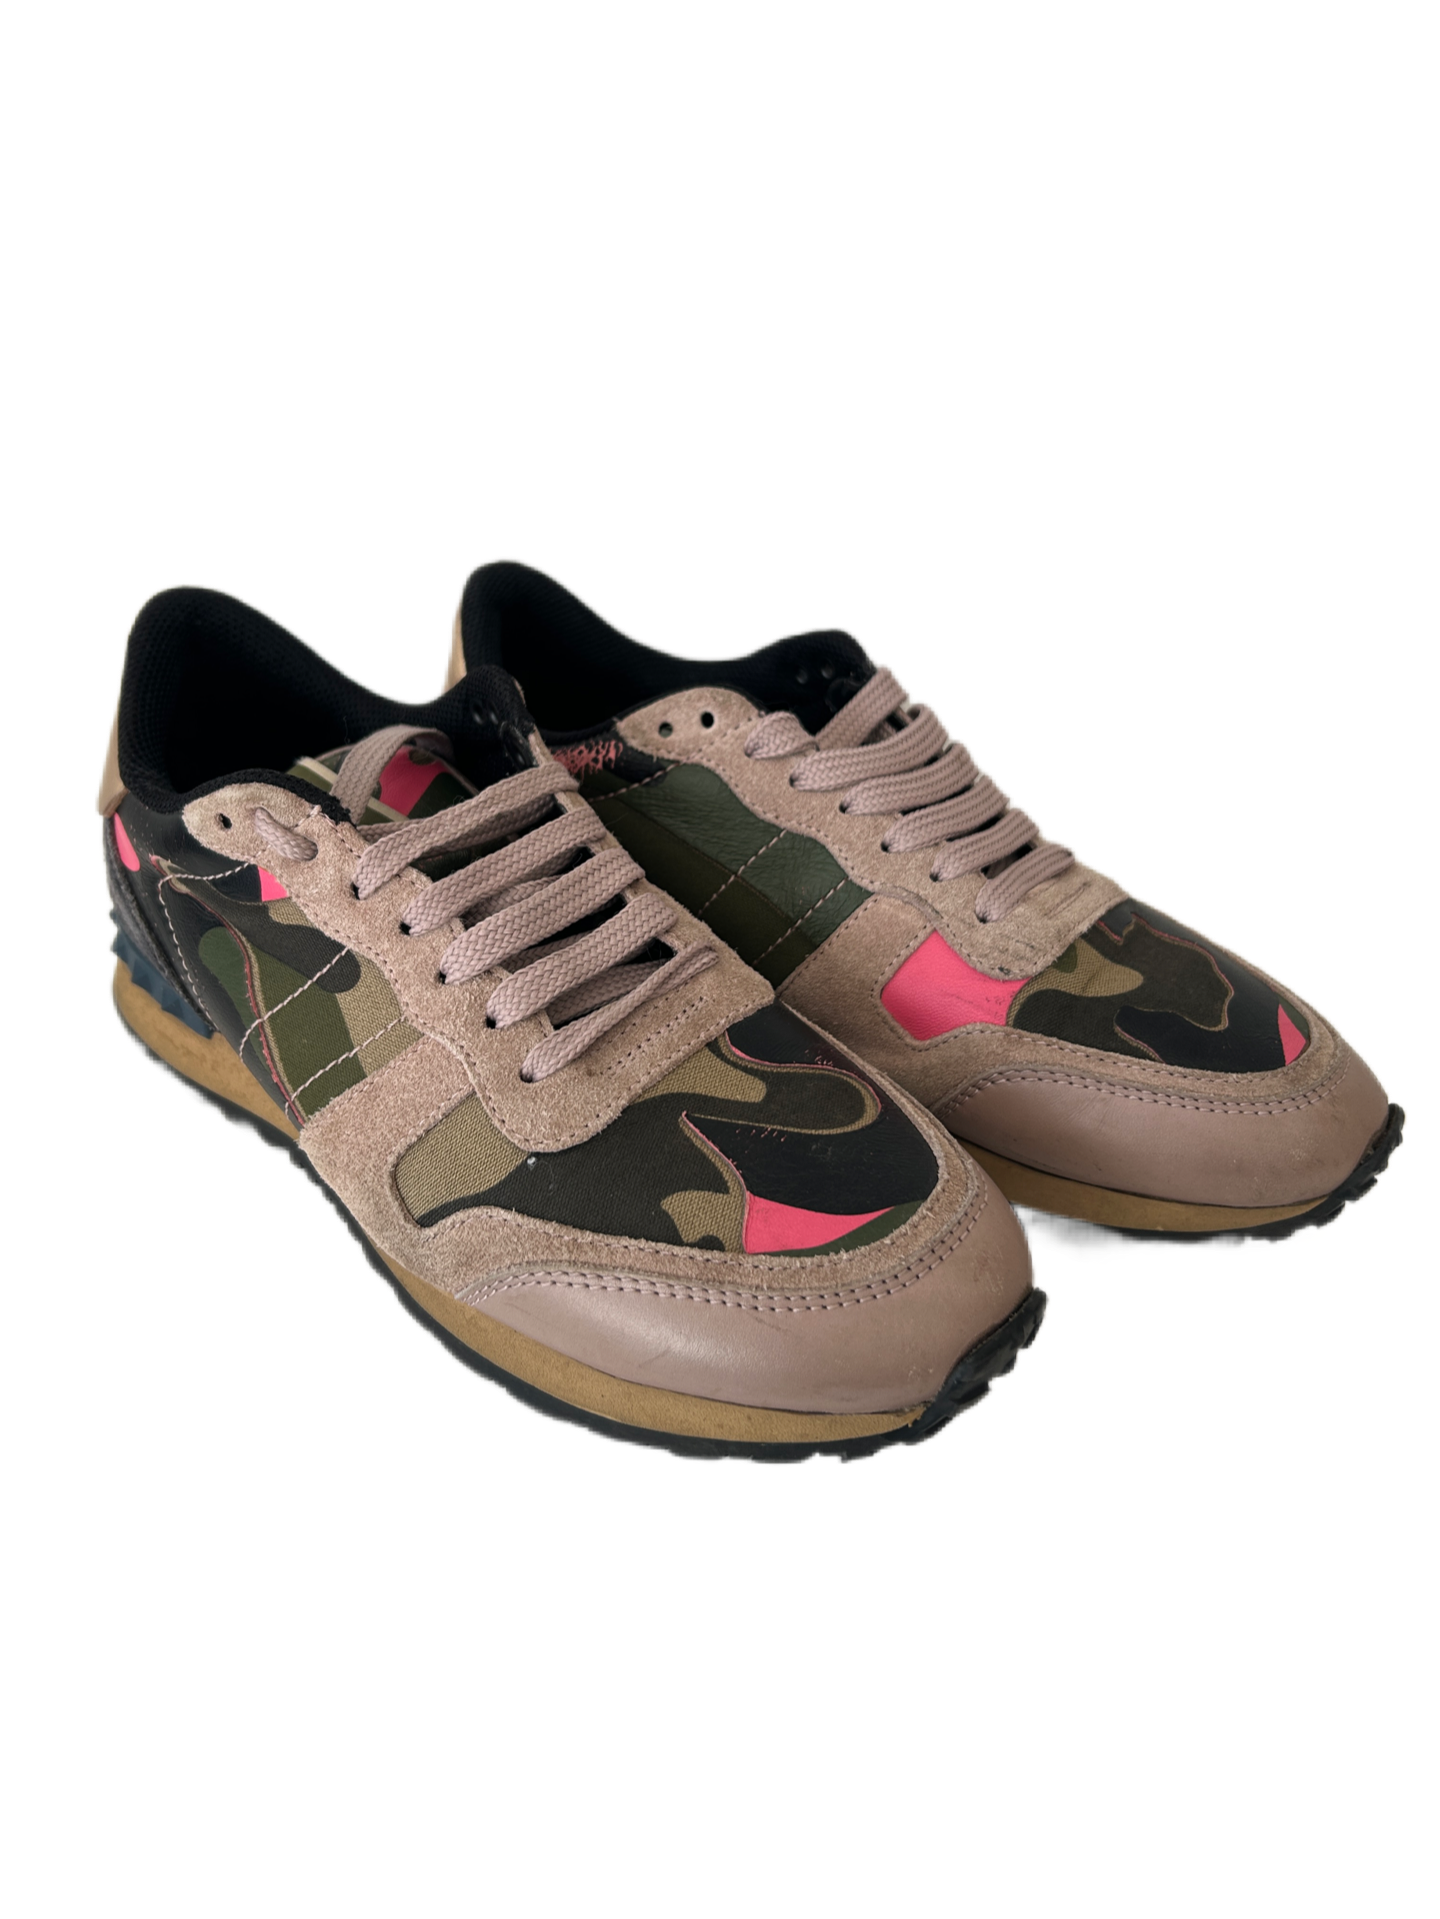 Valentino Rockrunner Leather Sneakers. Size: 38